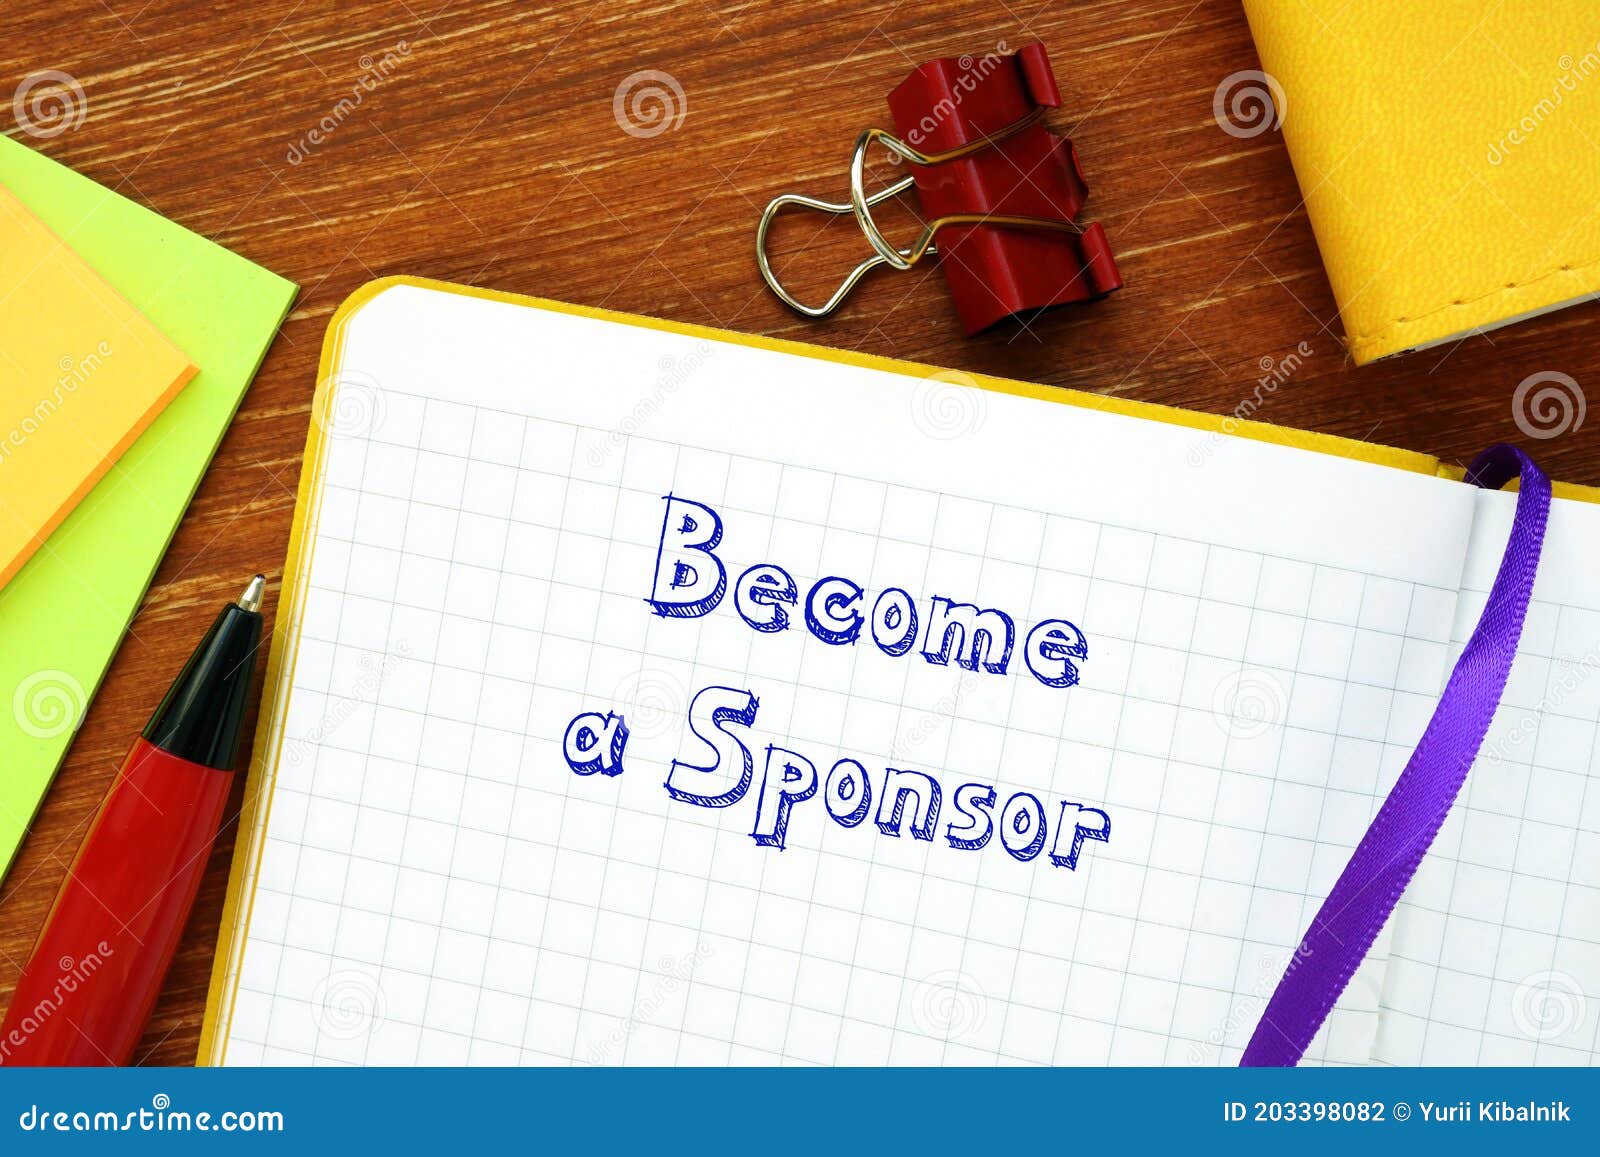 become a sponsor inscription on the page